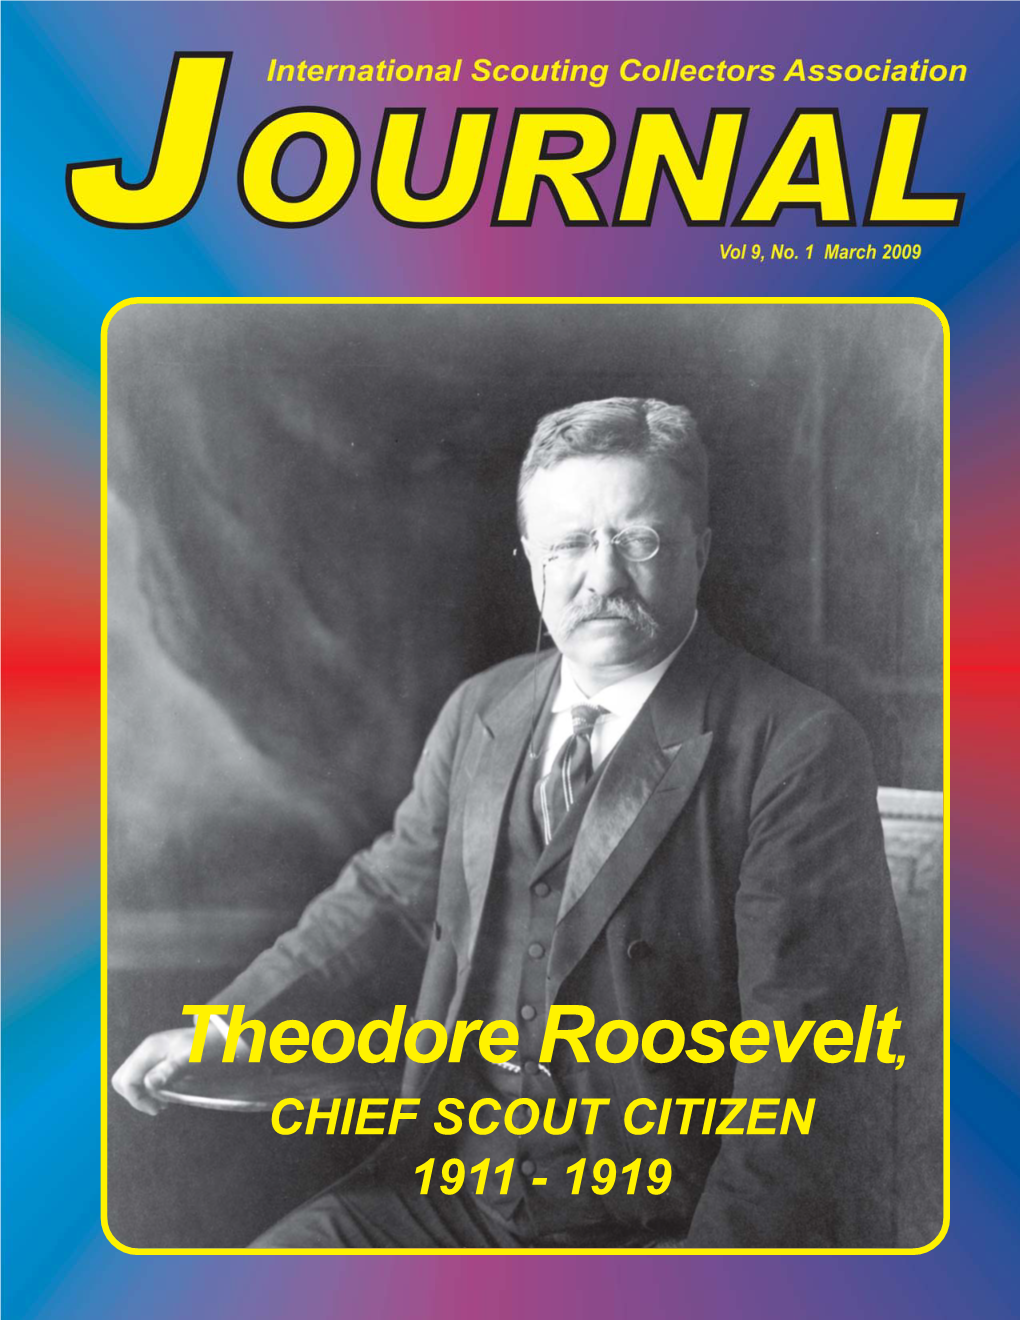 Theodore Roosevelt, CHIEF SCOUT CITIZEN 1911 - 1919 INTERNATIONAL SCOUTING COLLECTORS ASSOCIATION, INC